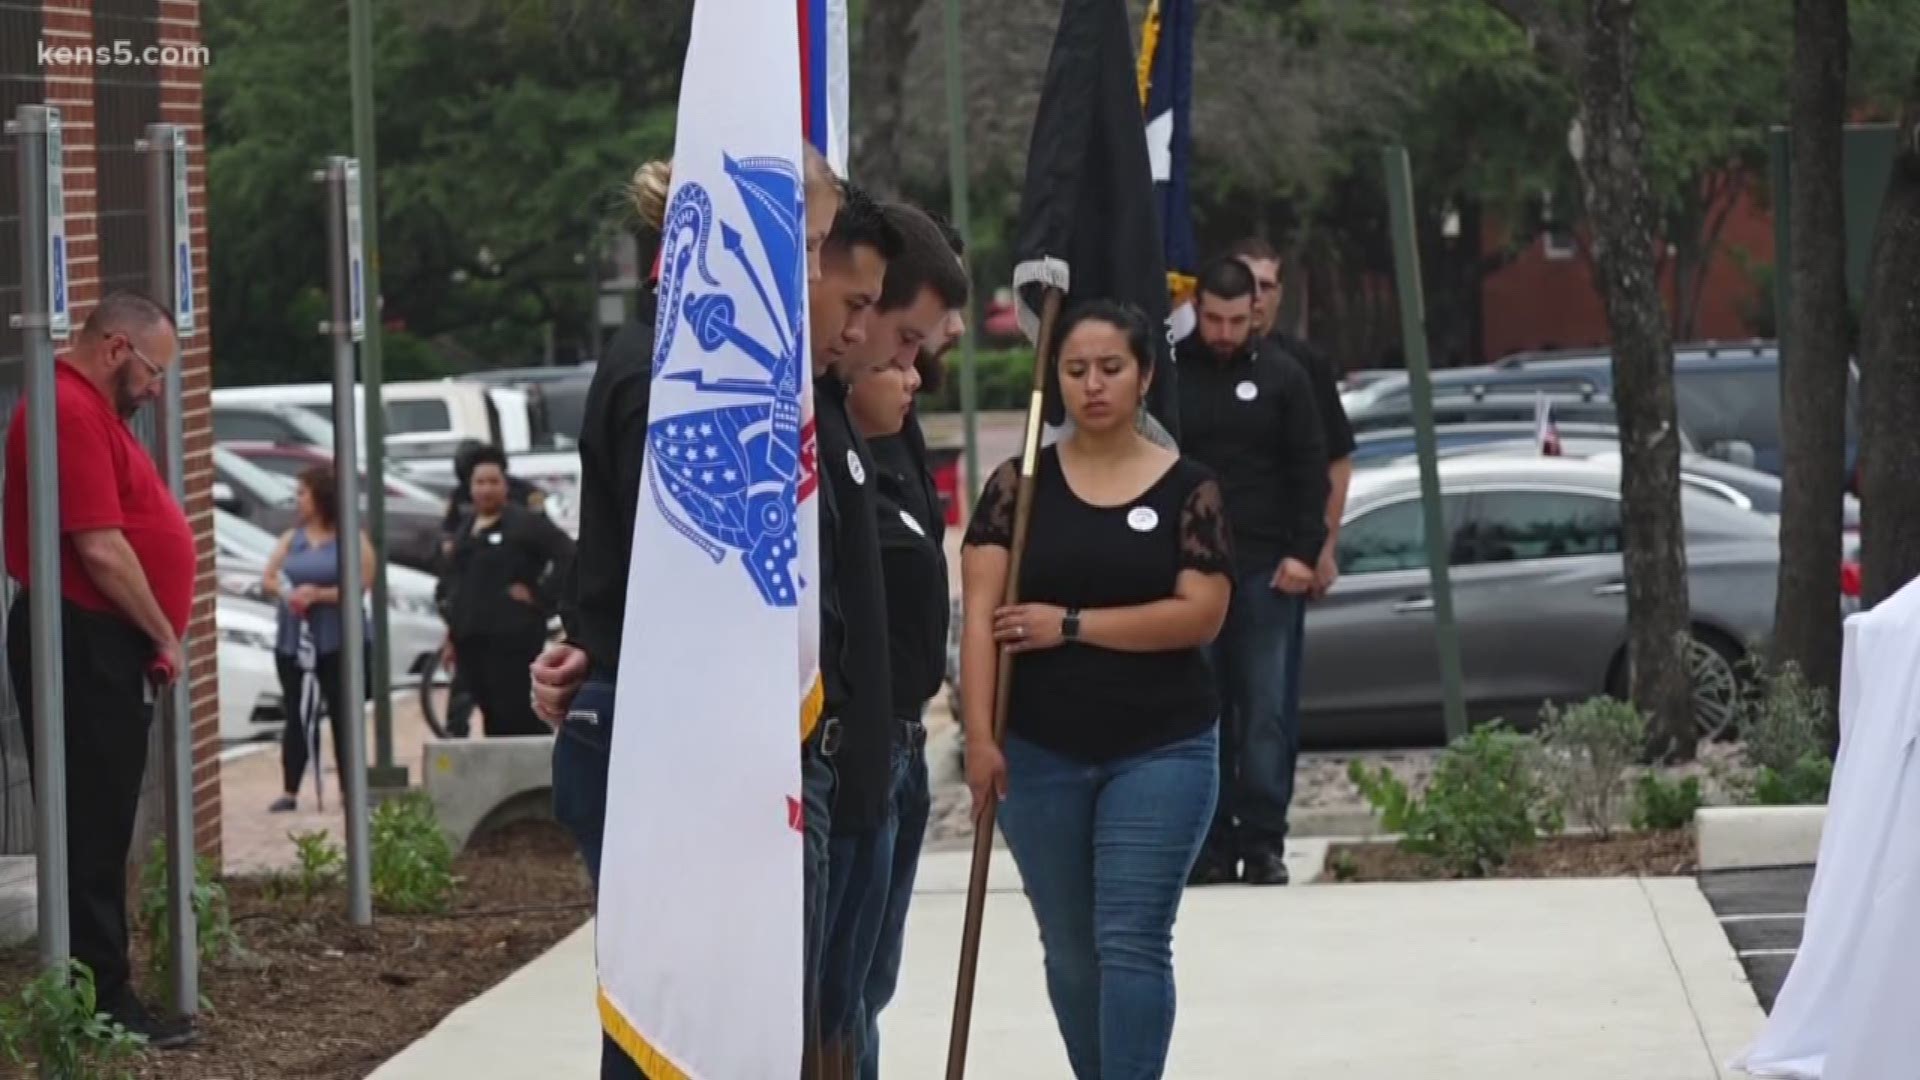 San Antonio College unveiled a new, state-of-the-art facility dedicated to serve veterans and active military students on campus. Eyewitness News reporter Sharon Ko was there.